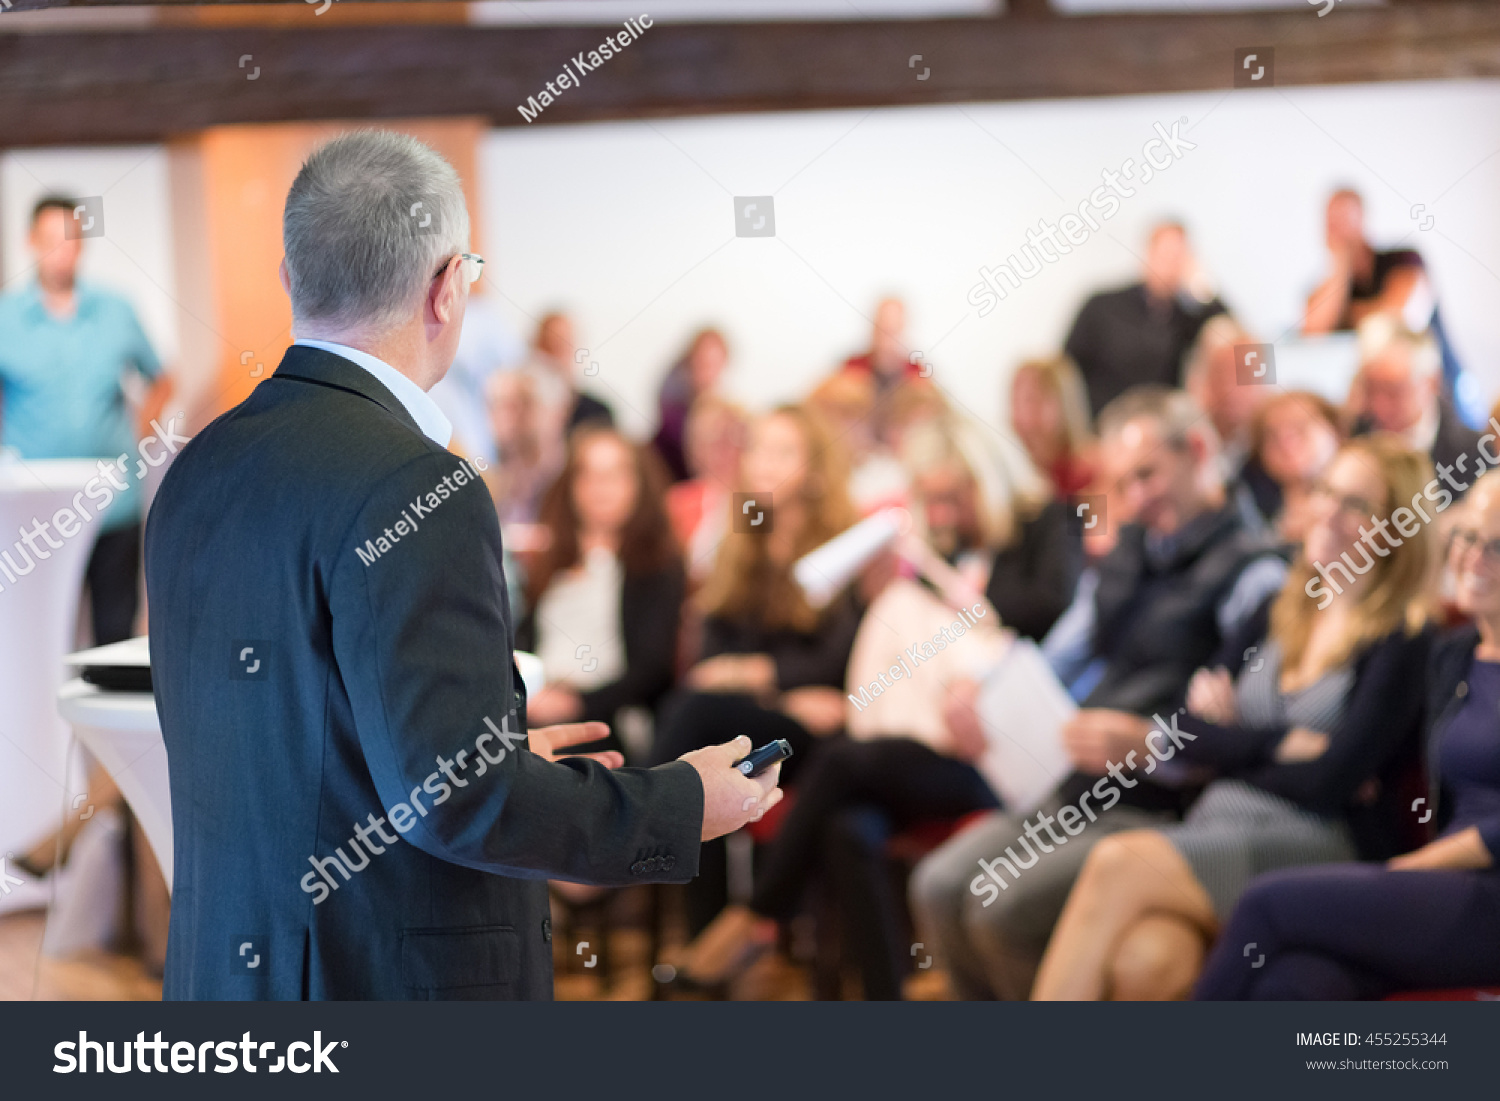 Speaker at Business Conference with Public Presentations. Audience at the conference hall. Entrepreneurship club. Rear view. Horisontal composition. Background blur. #455255344